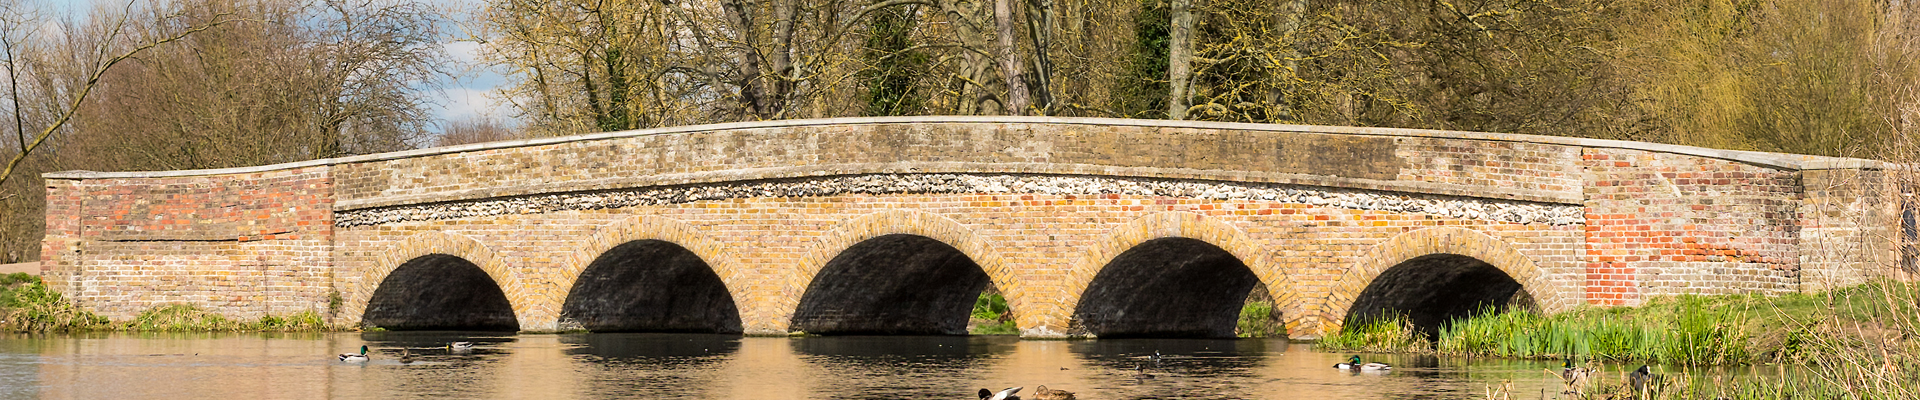 Five Arches Bridge in Sidcup, Bexley, London